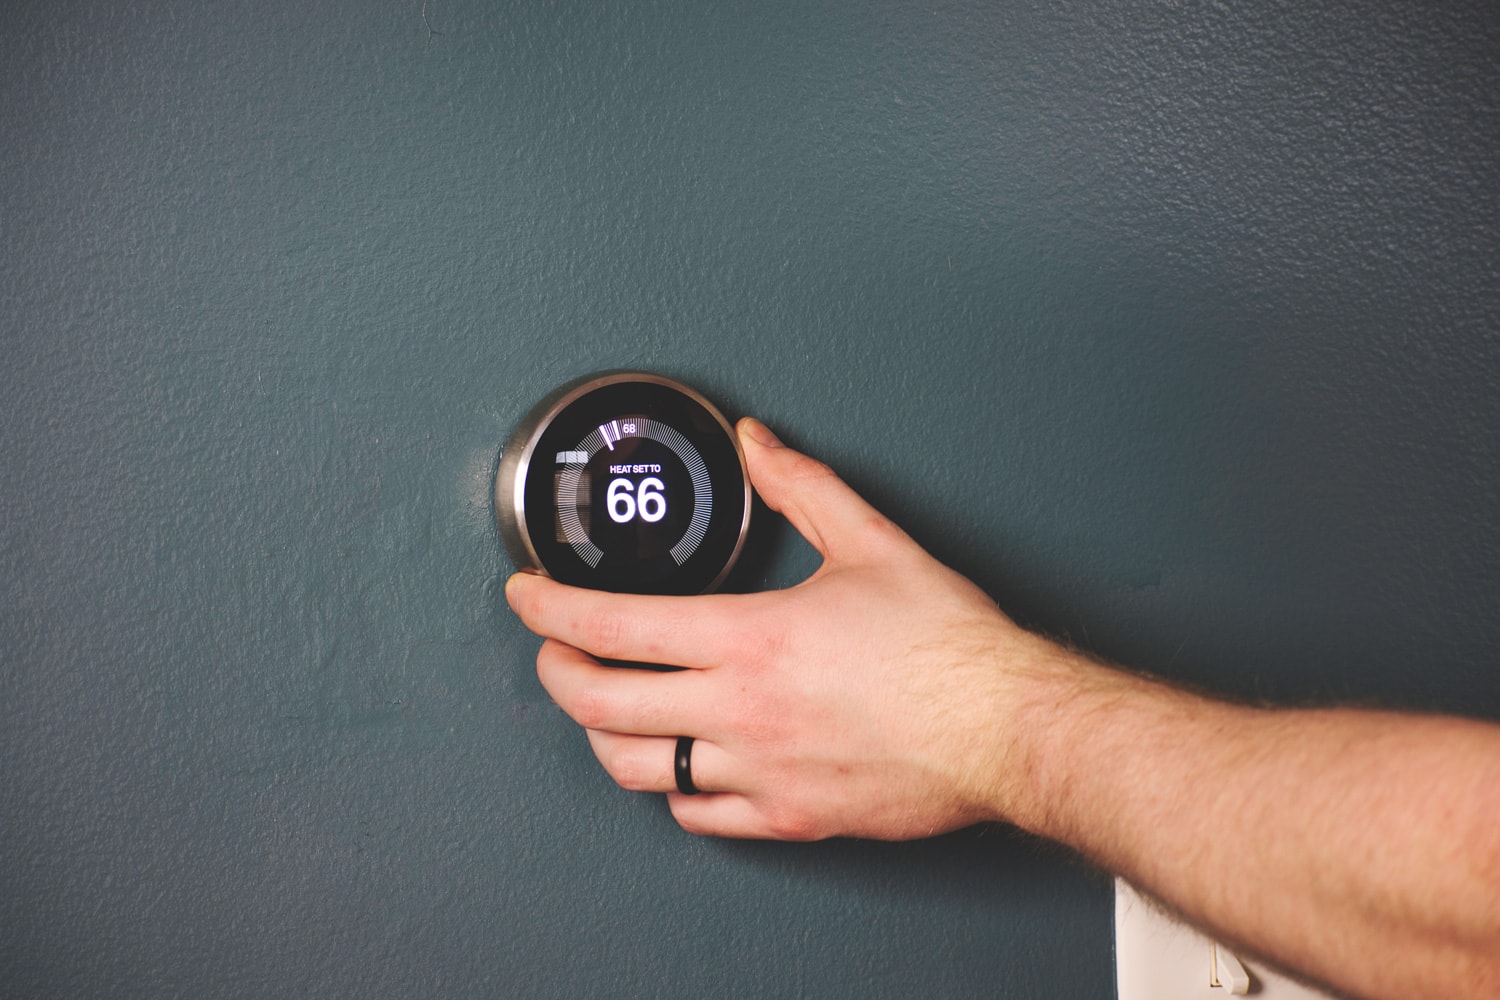 Hand adjusting temperature on electric thermostat